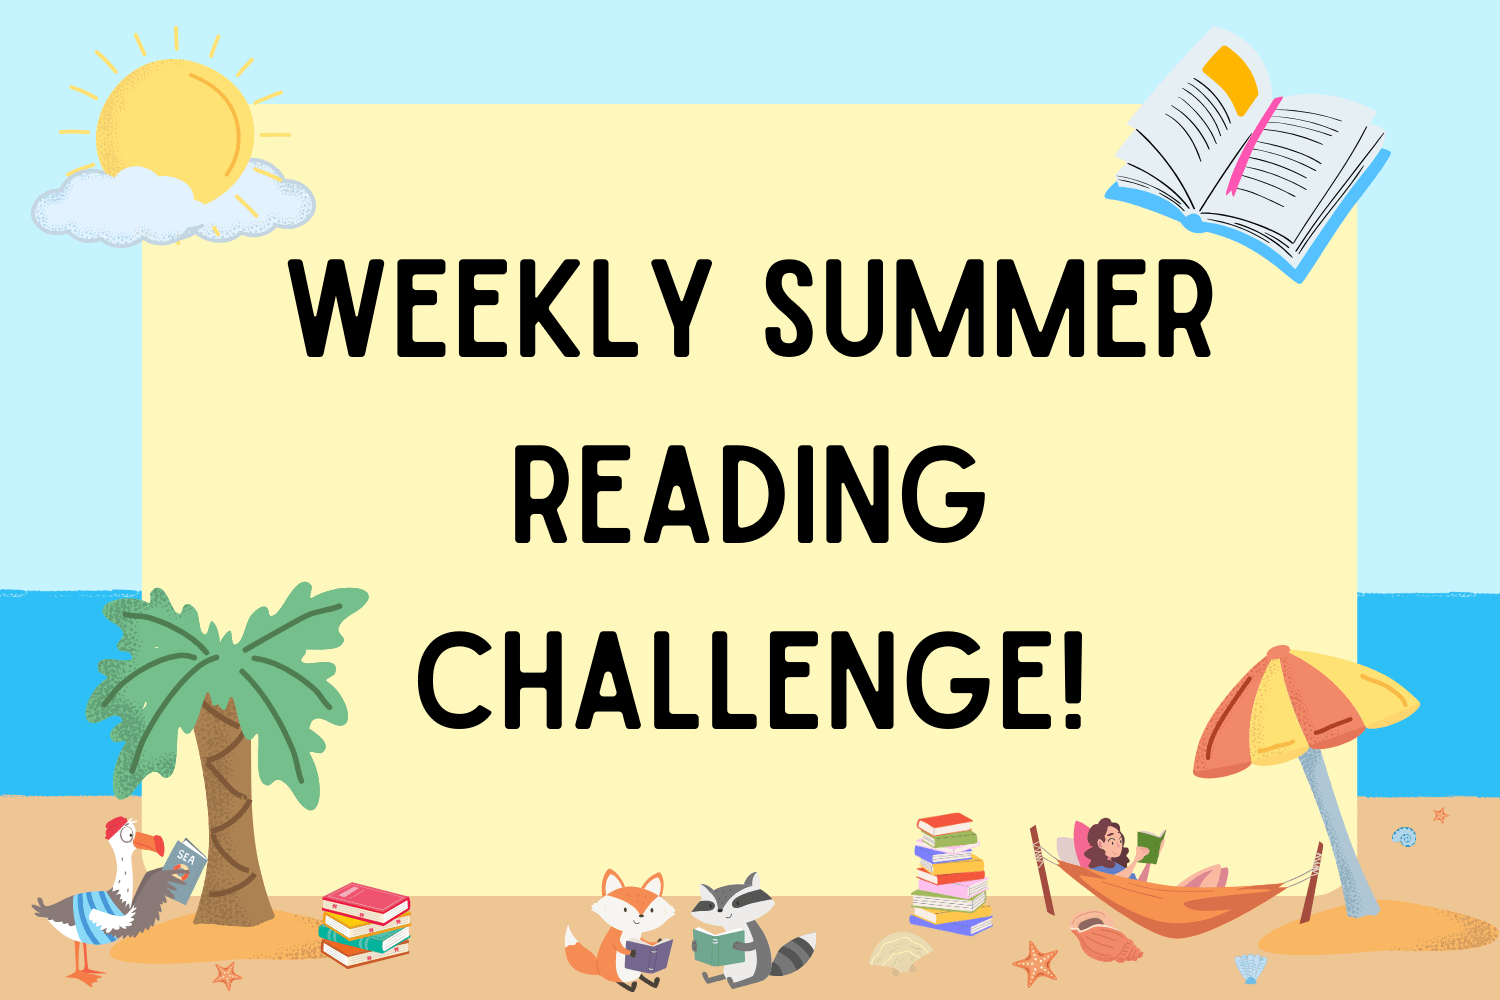 Image that says "Weekly Summer Reading Challenge!"